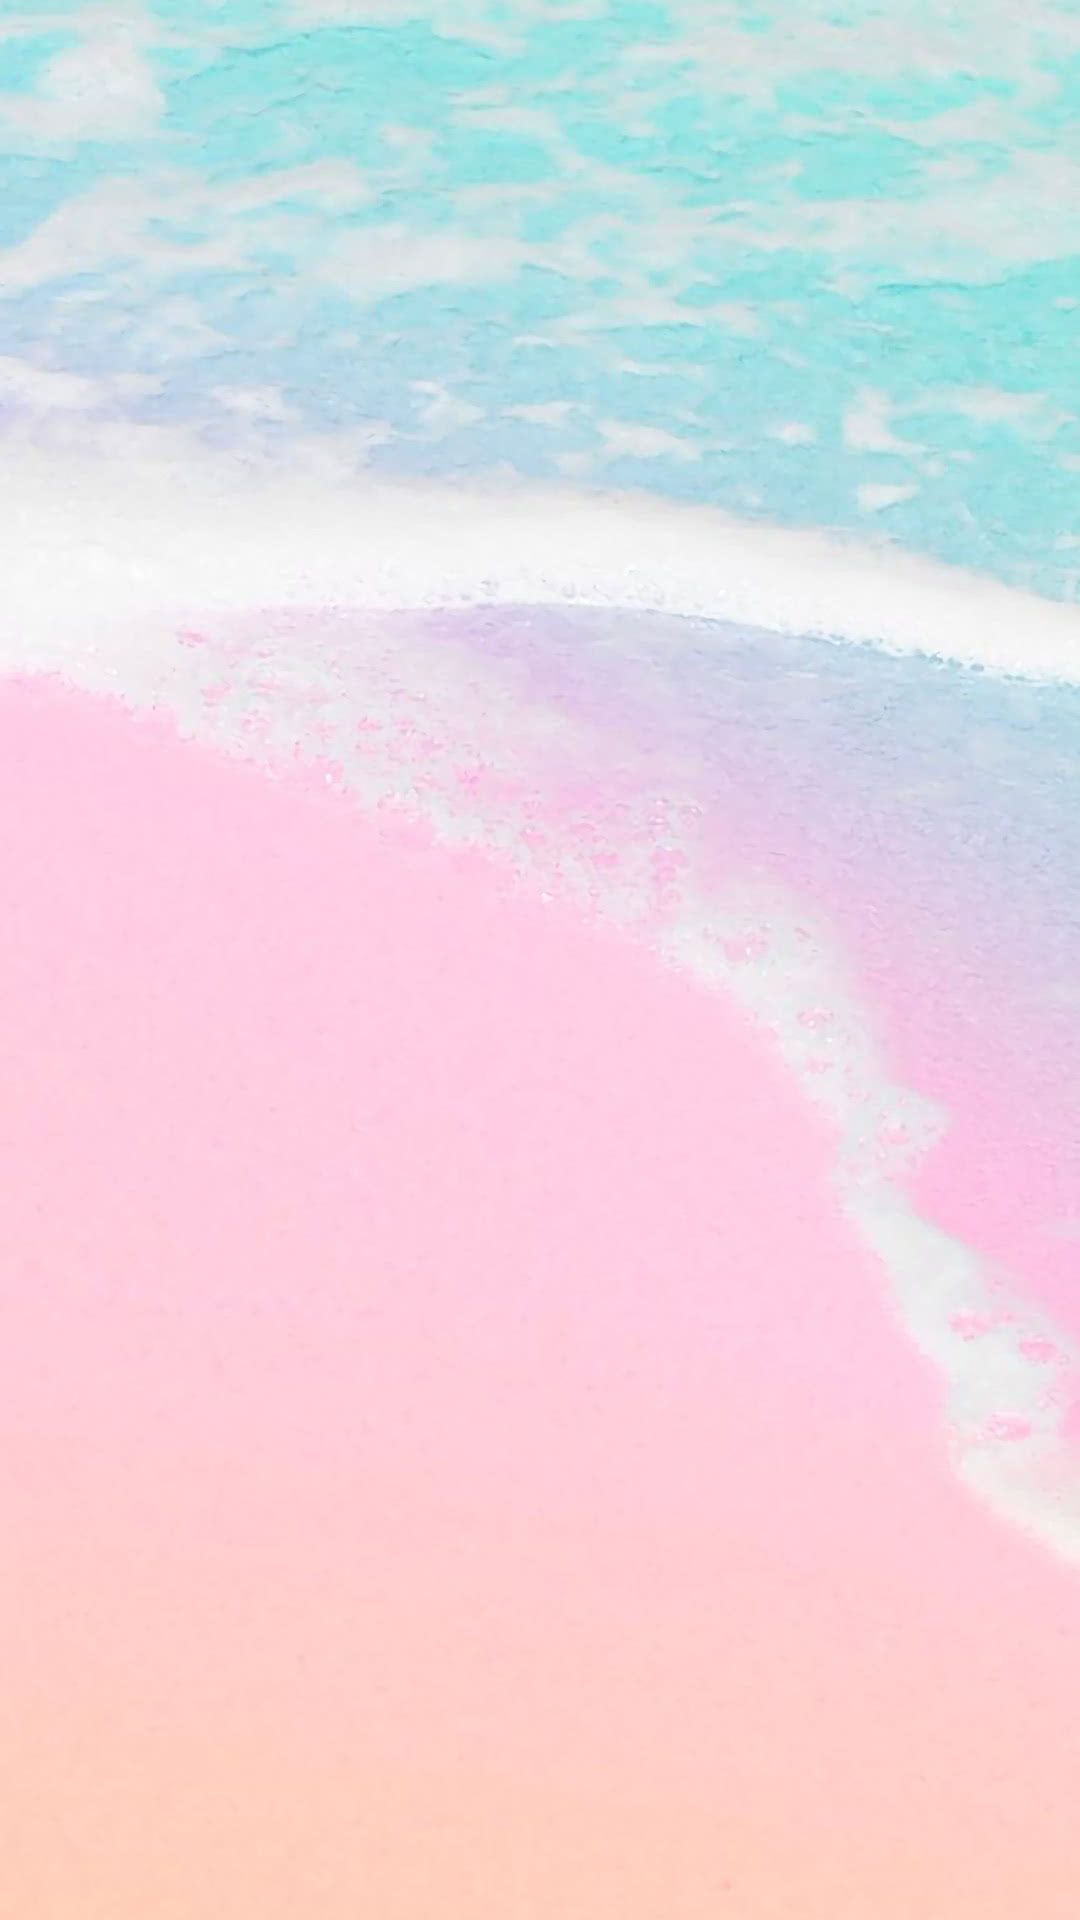 Pastel-colored beaches | iPhone Wallpapers